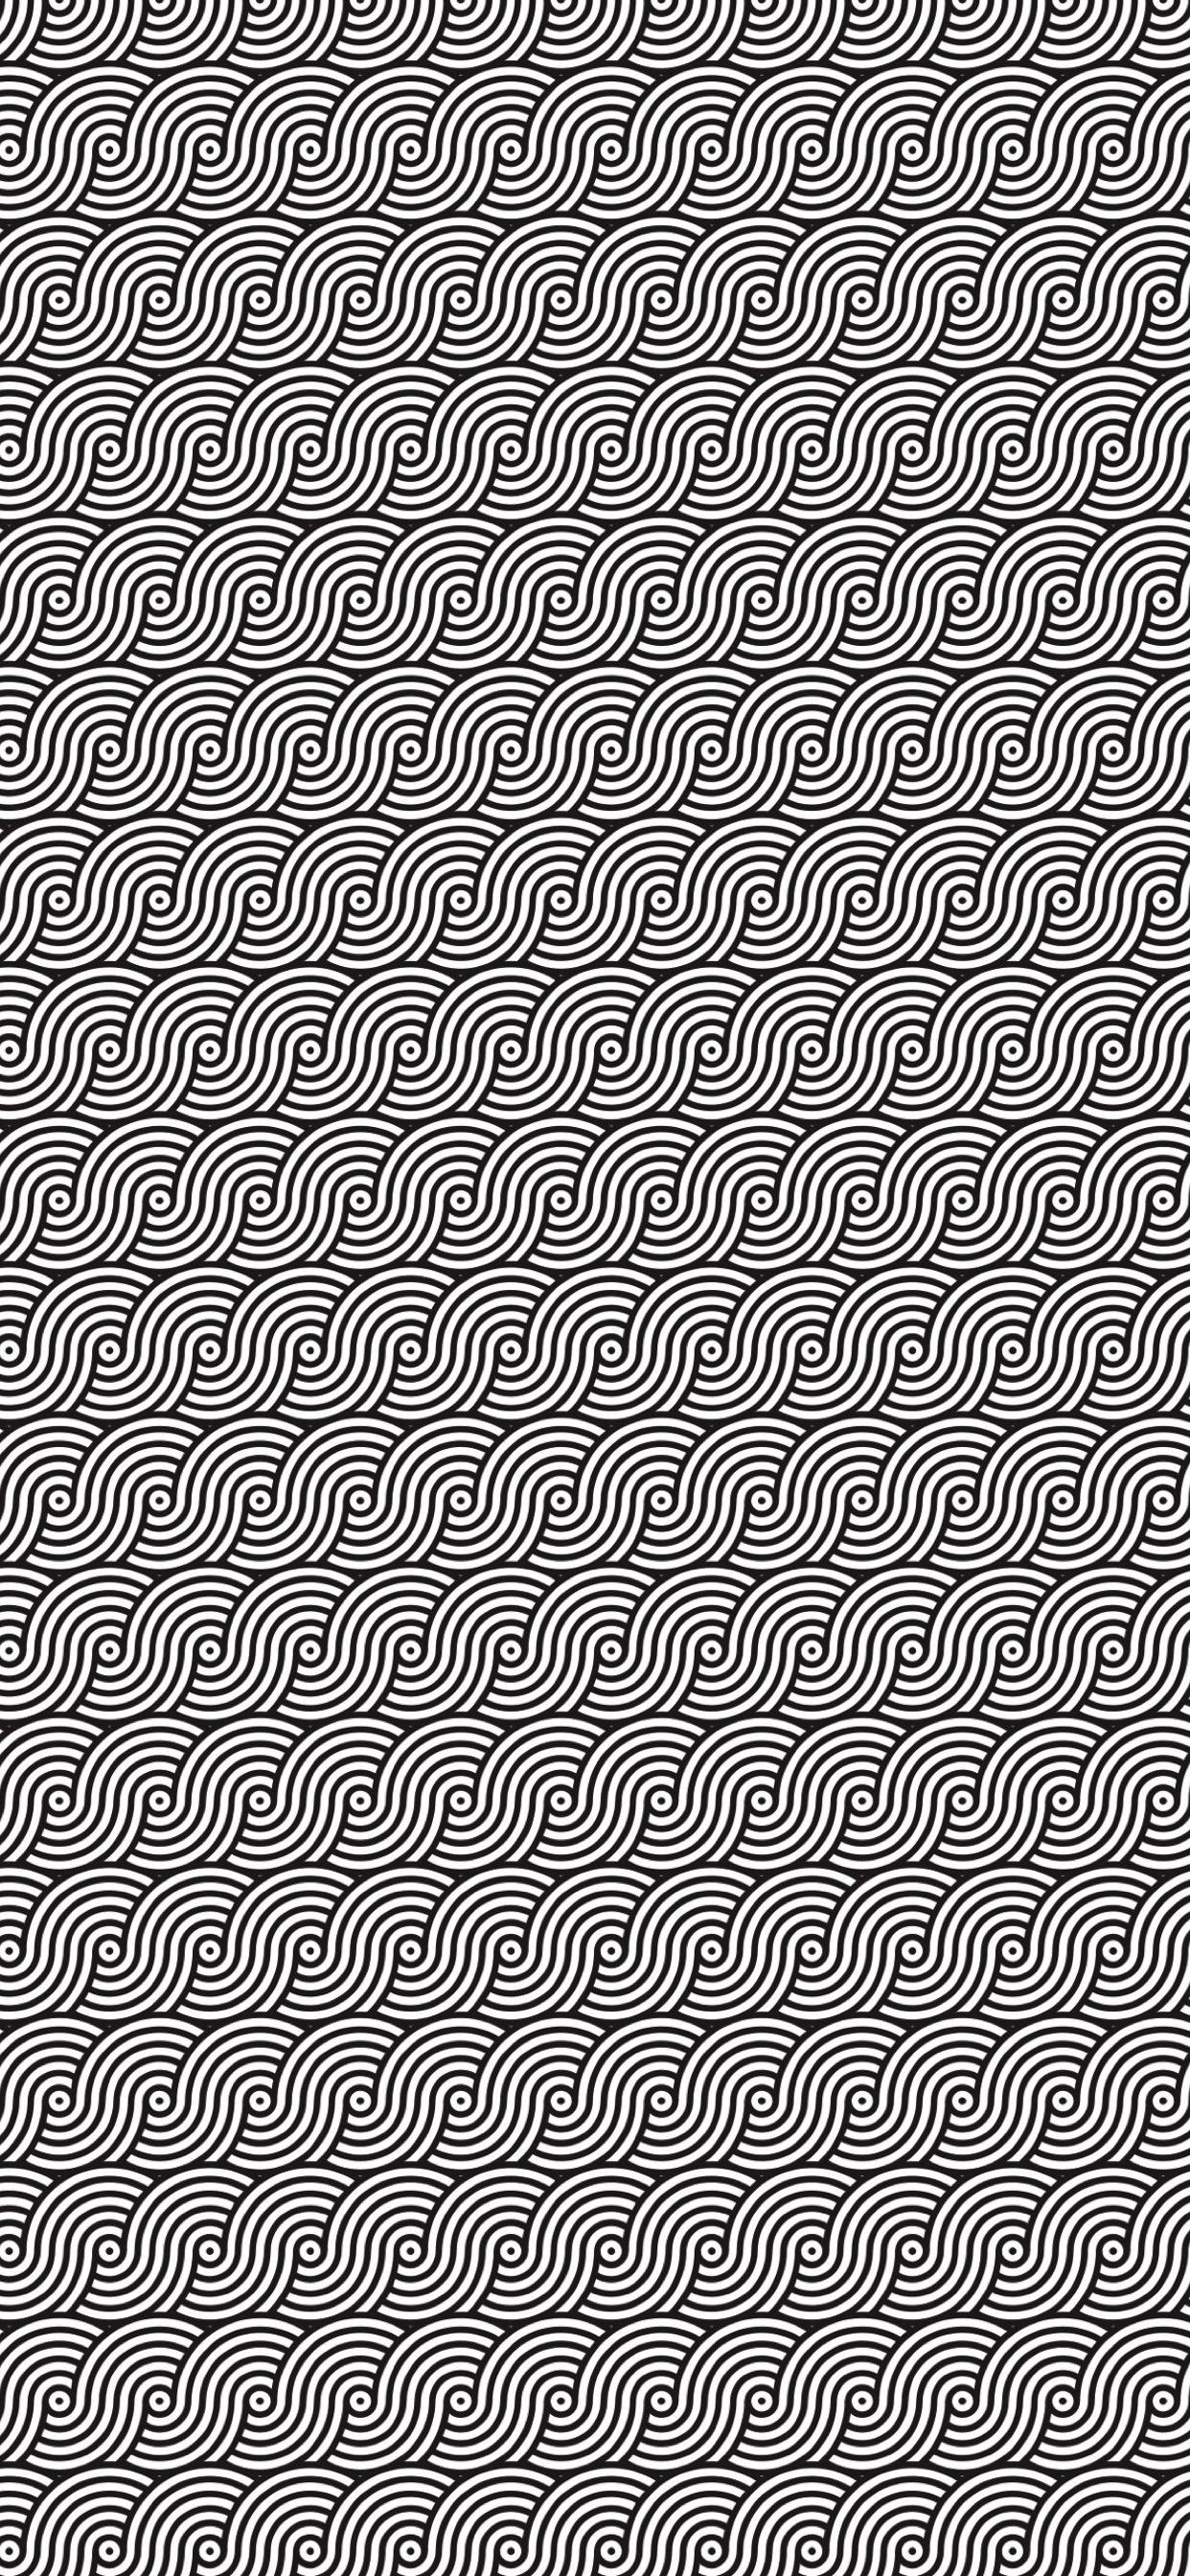 Pattern Round Wave Black And White Wallpaper Sc Iphone Xs Max